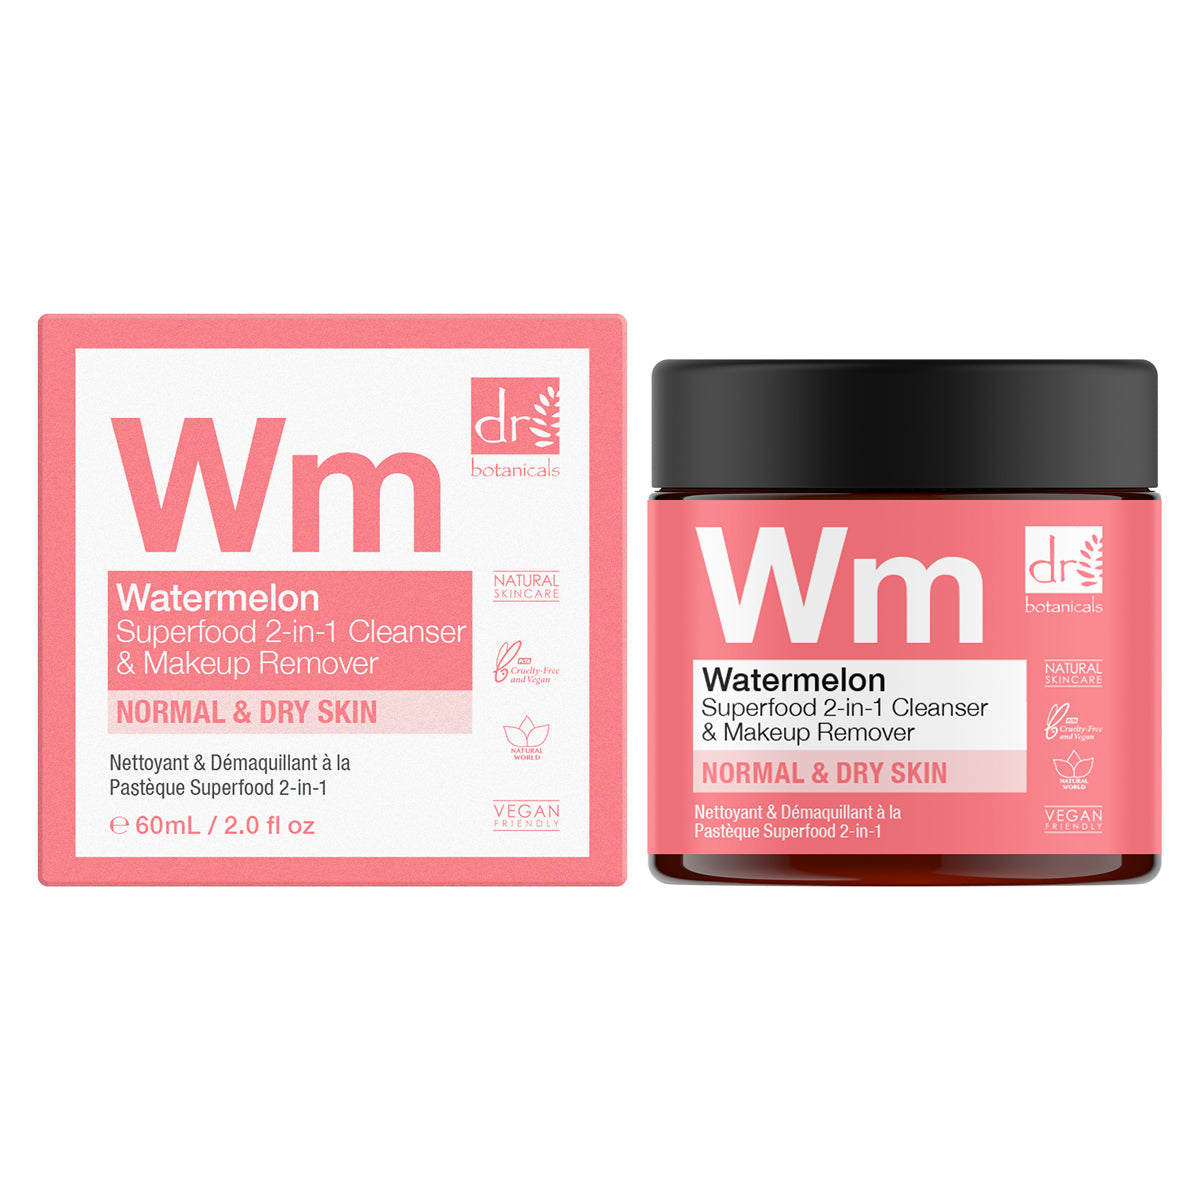 Watermelon Superfood 2-in-1 Cleanser & Makeup Remover Trio